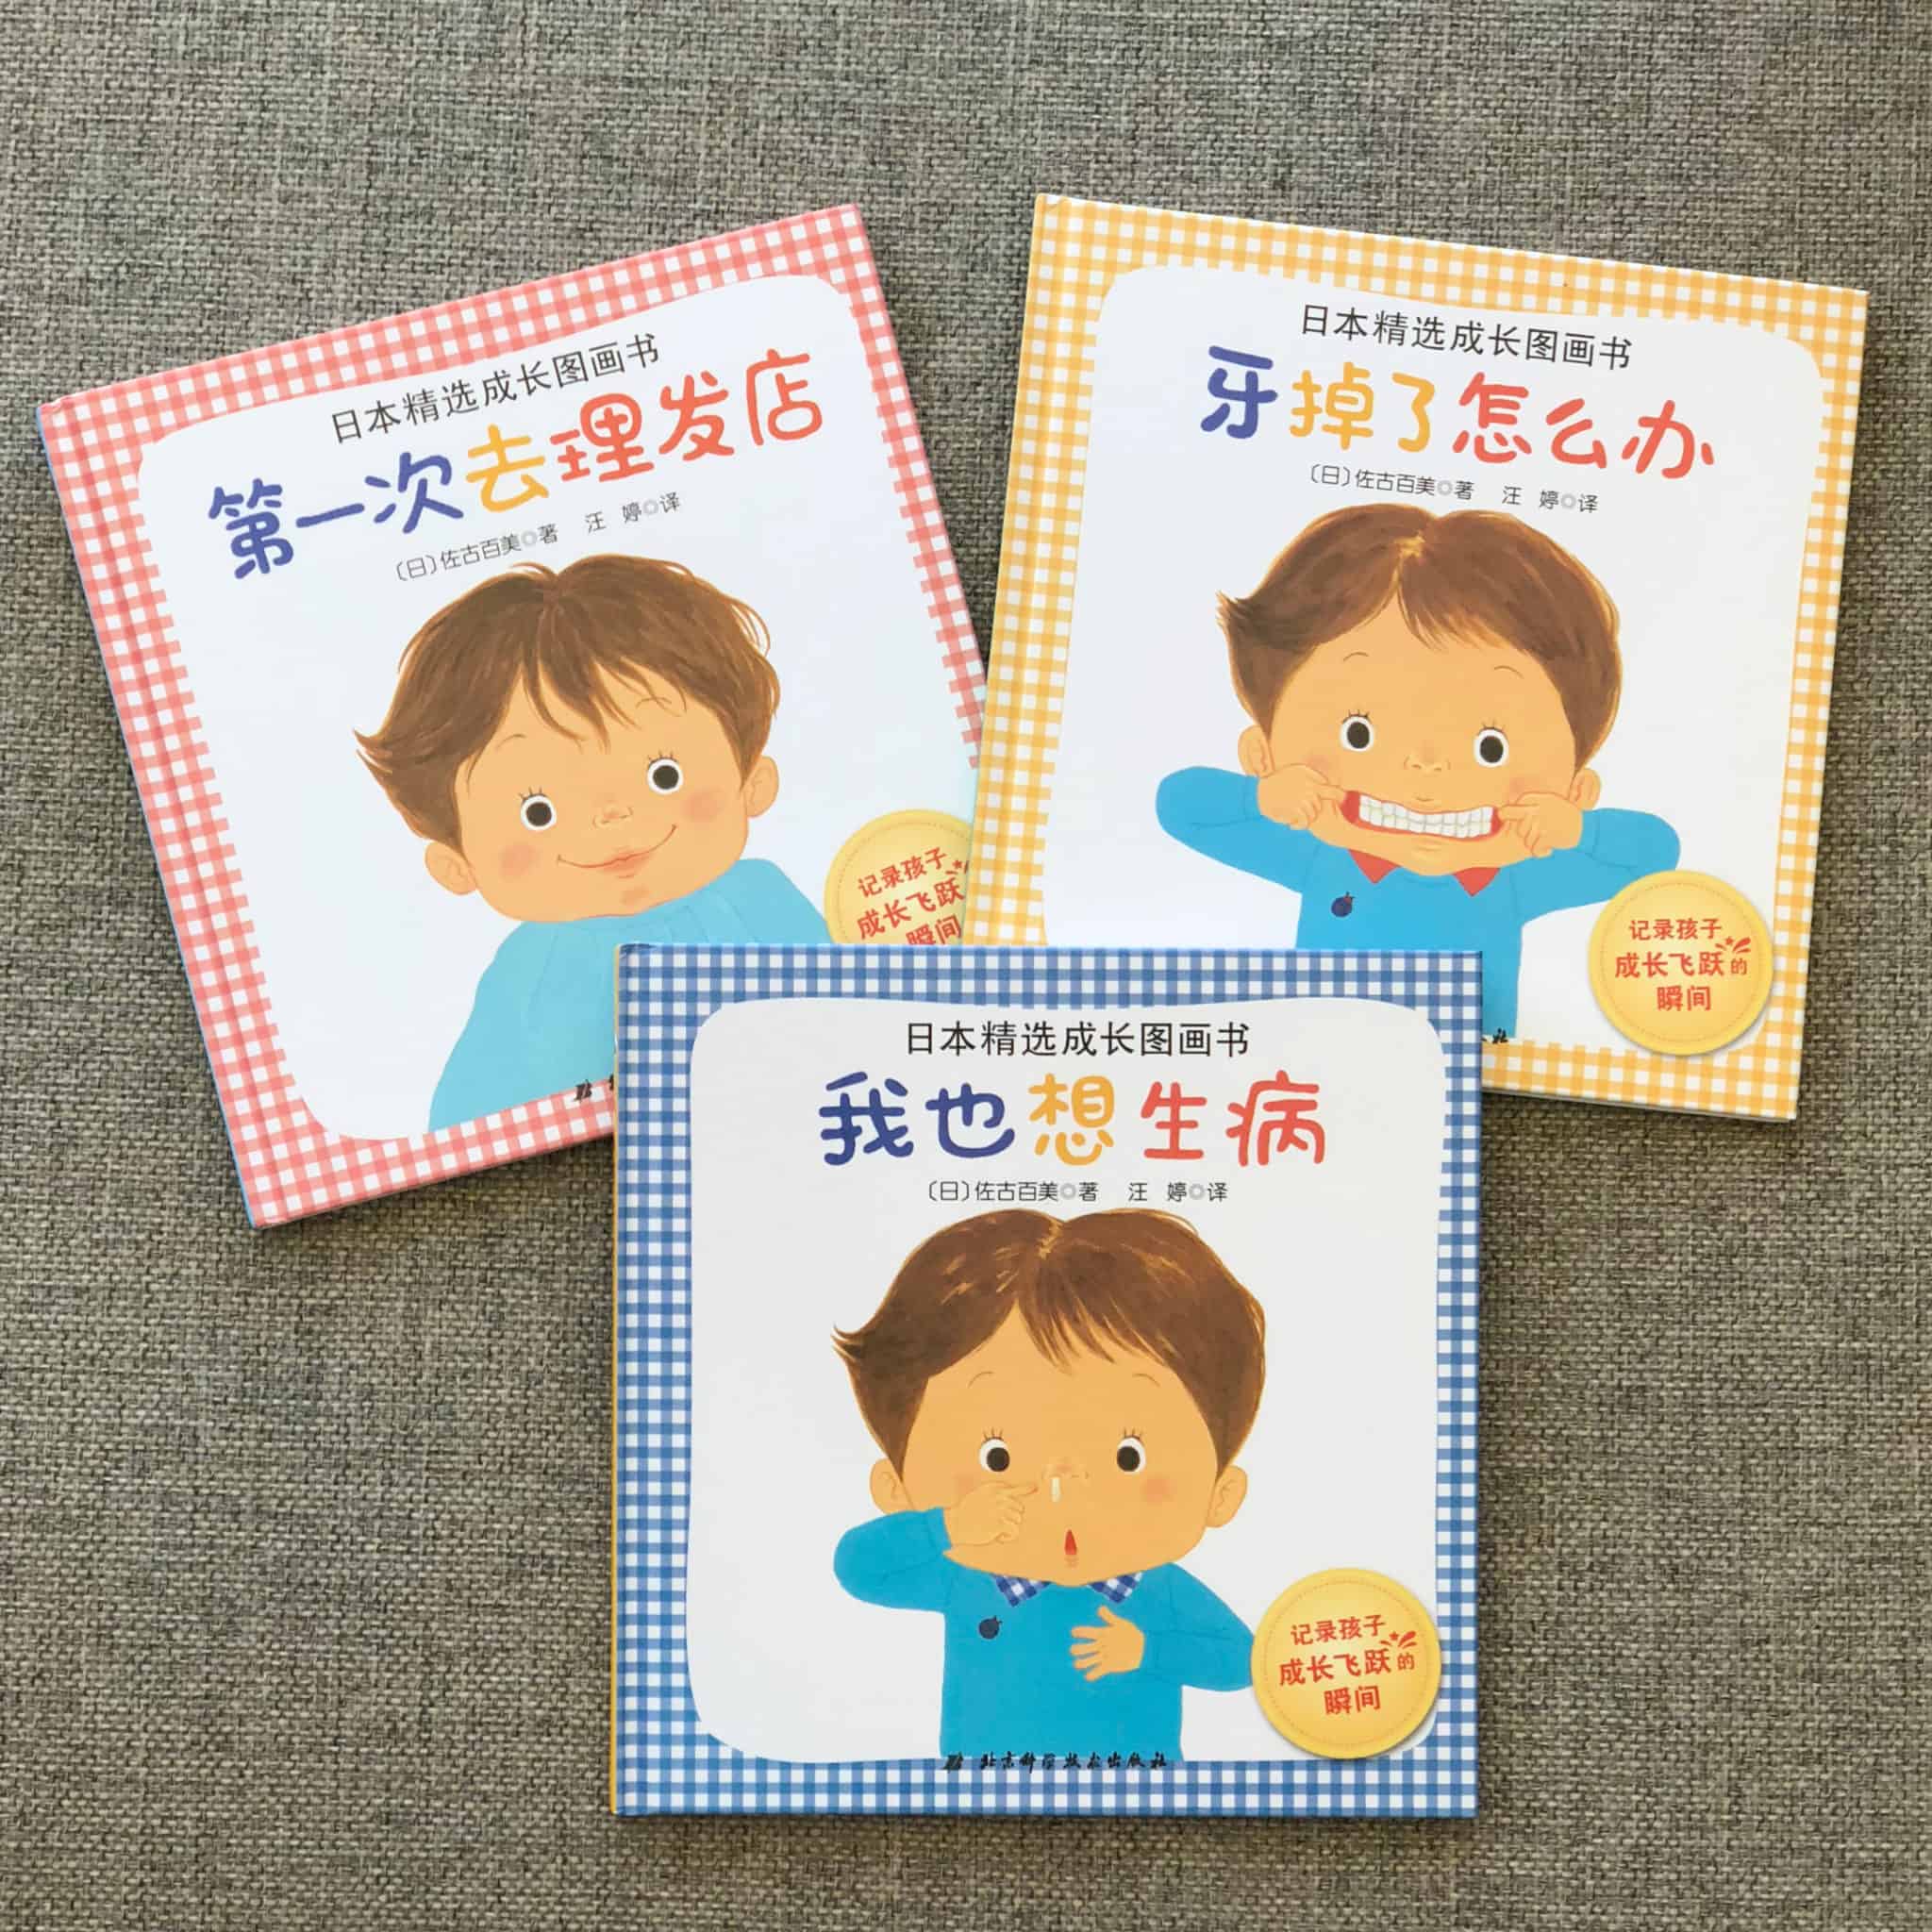 Translated Japanese Stories about Growing Up – Chinese Picture Books